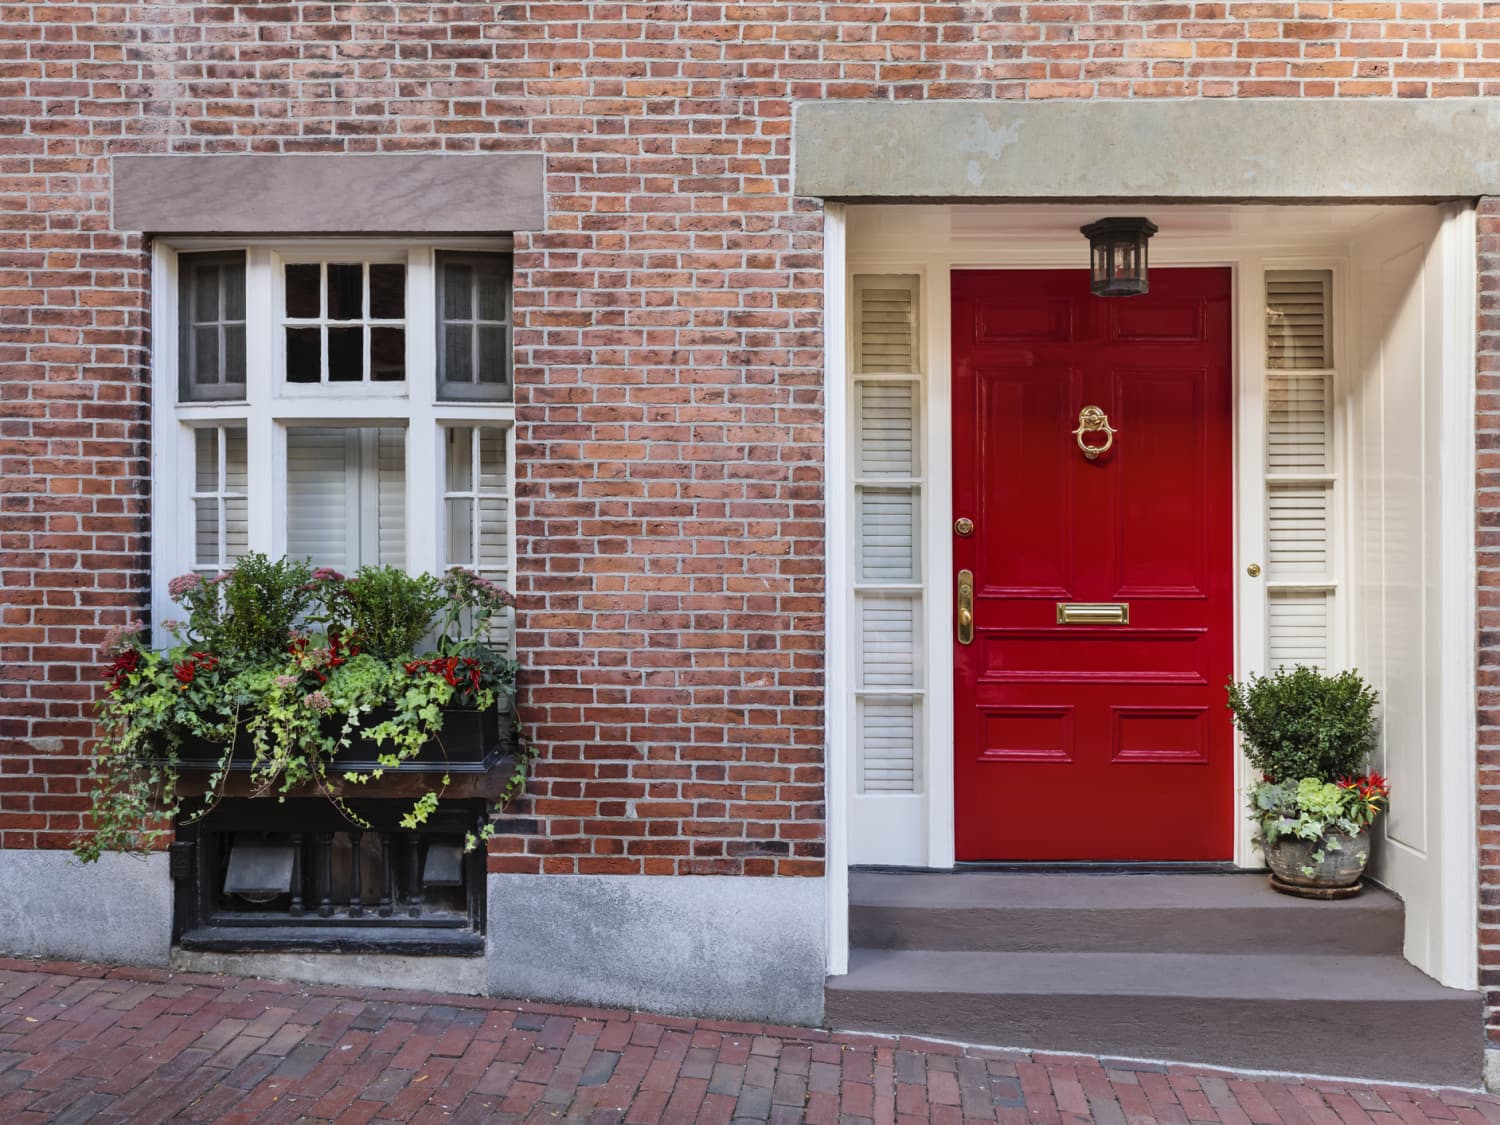 What Does a Red Front Door Mean Symbolism of Red Door Houses ...